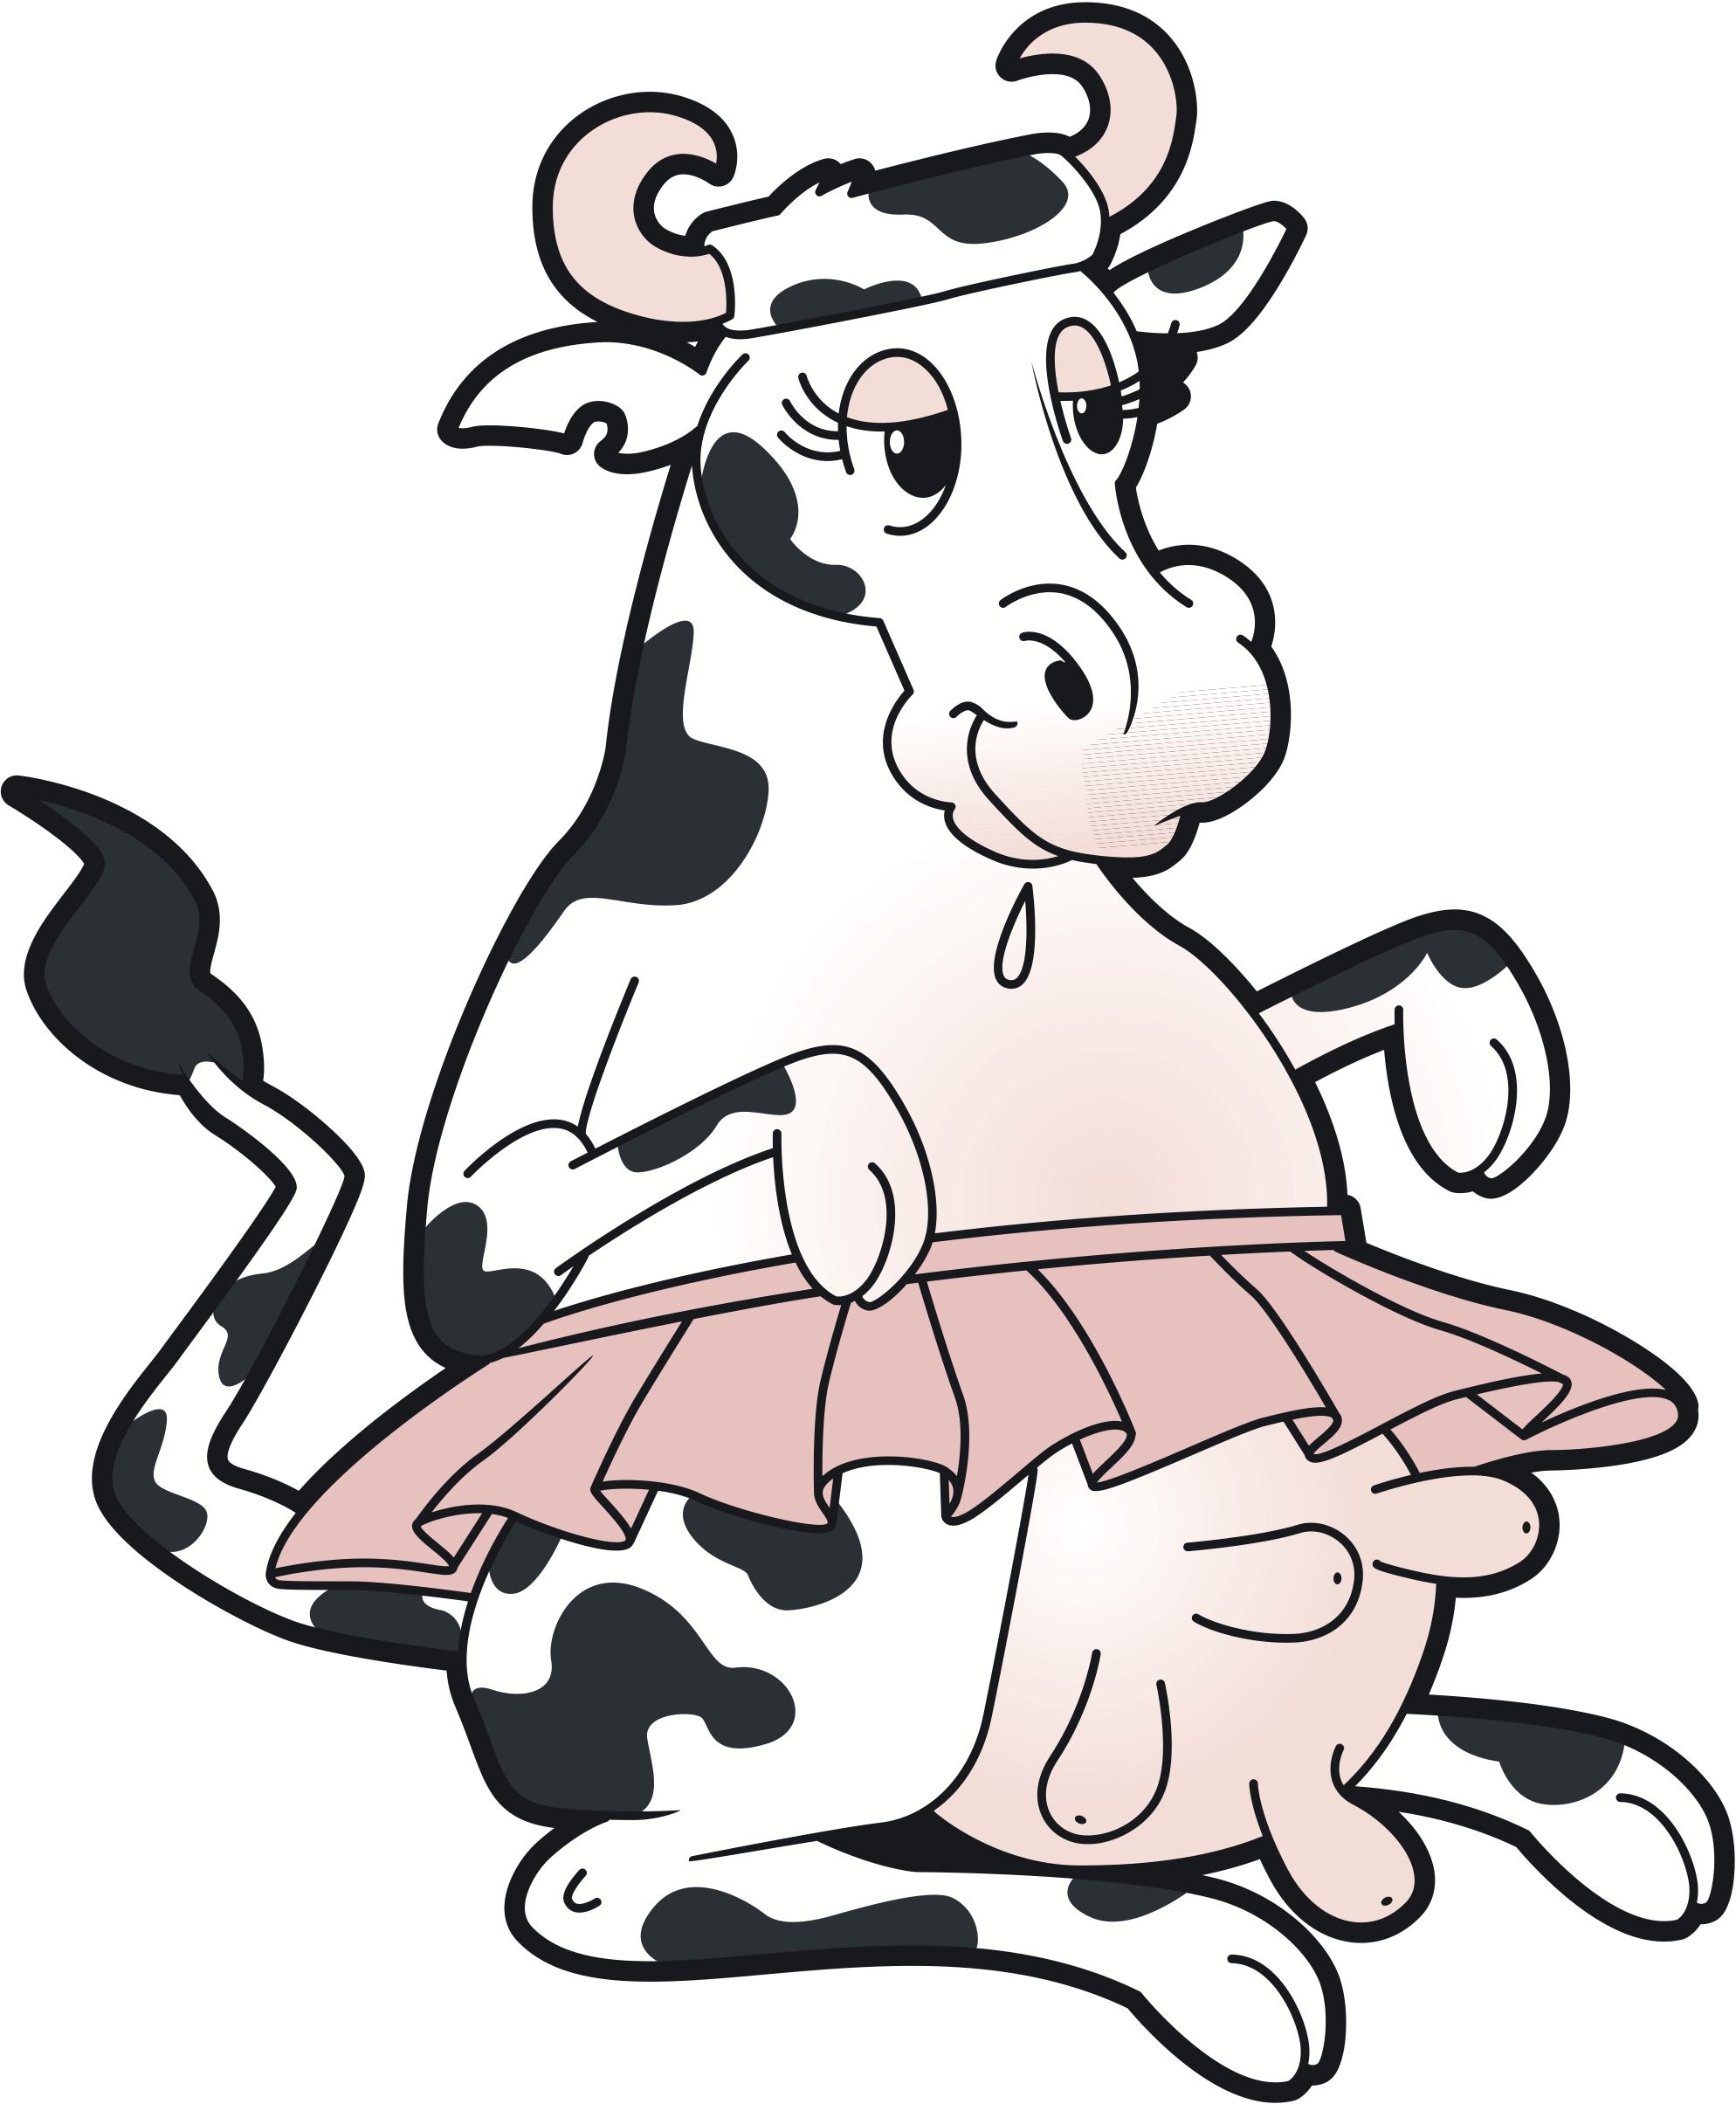 Cows Cartoon Images - Clipart library